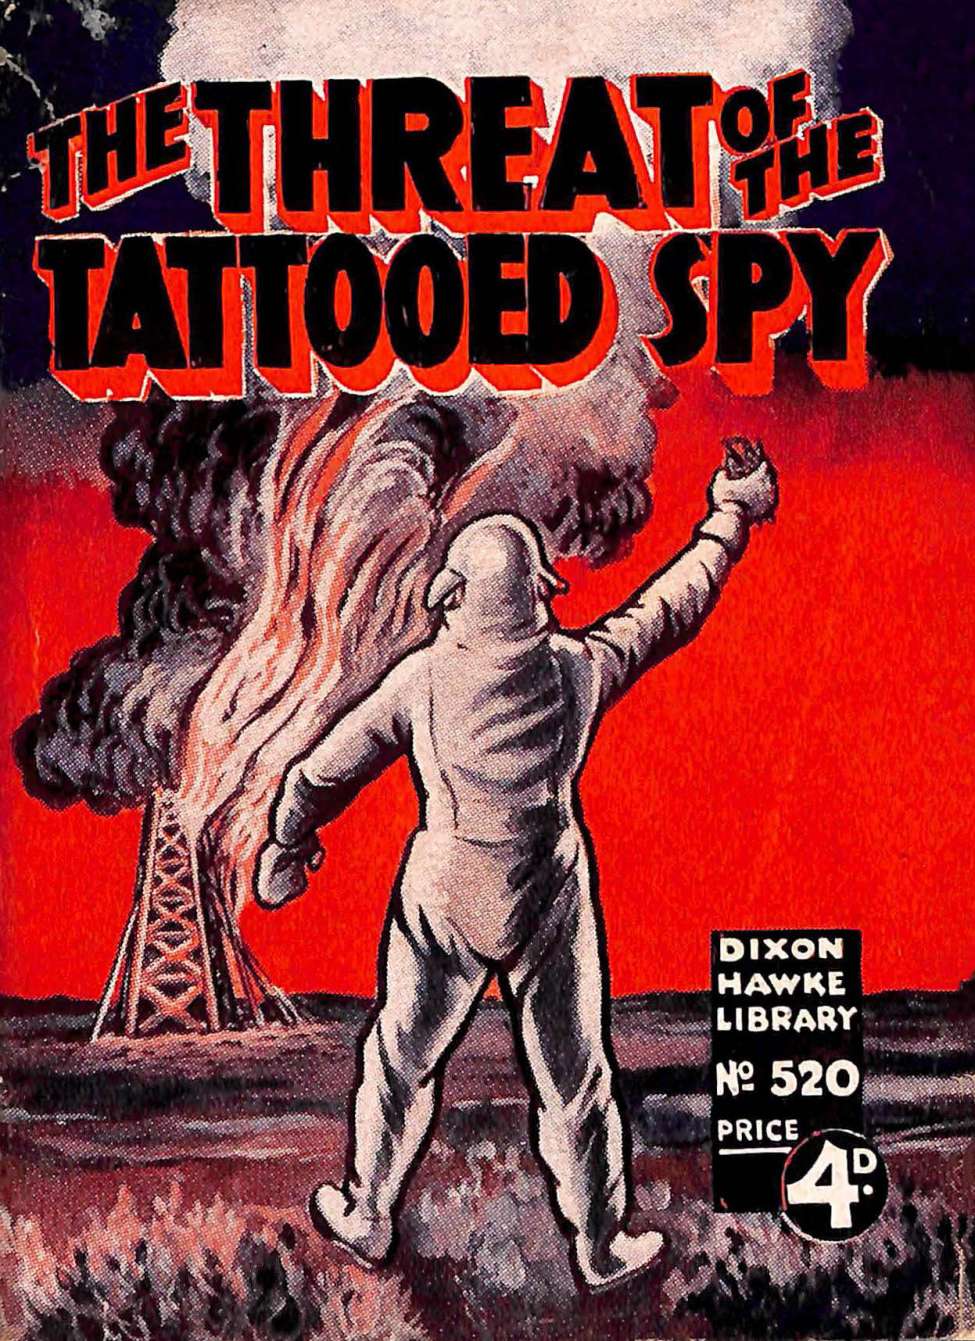 Comic Book Cover For Dixon Hawke Library 520 - The Threat of the Tattooed Spy